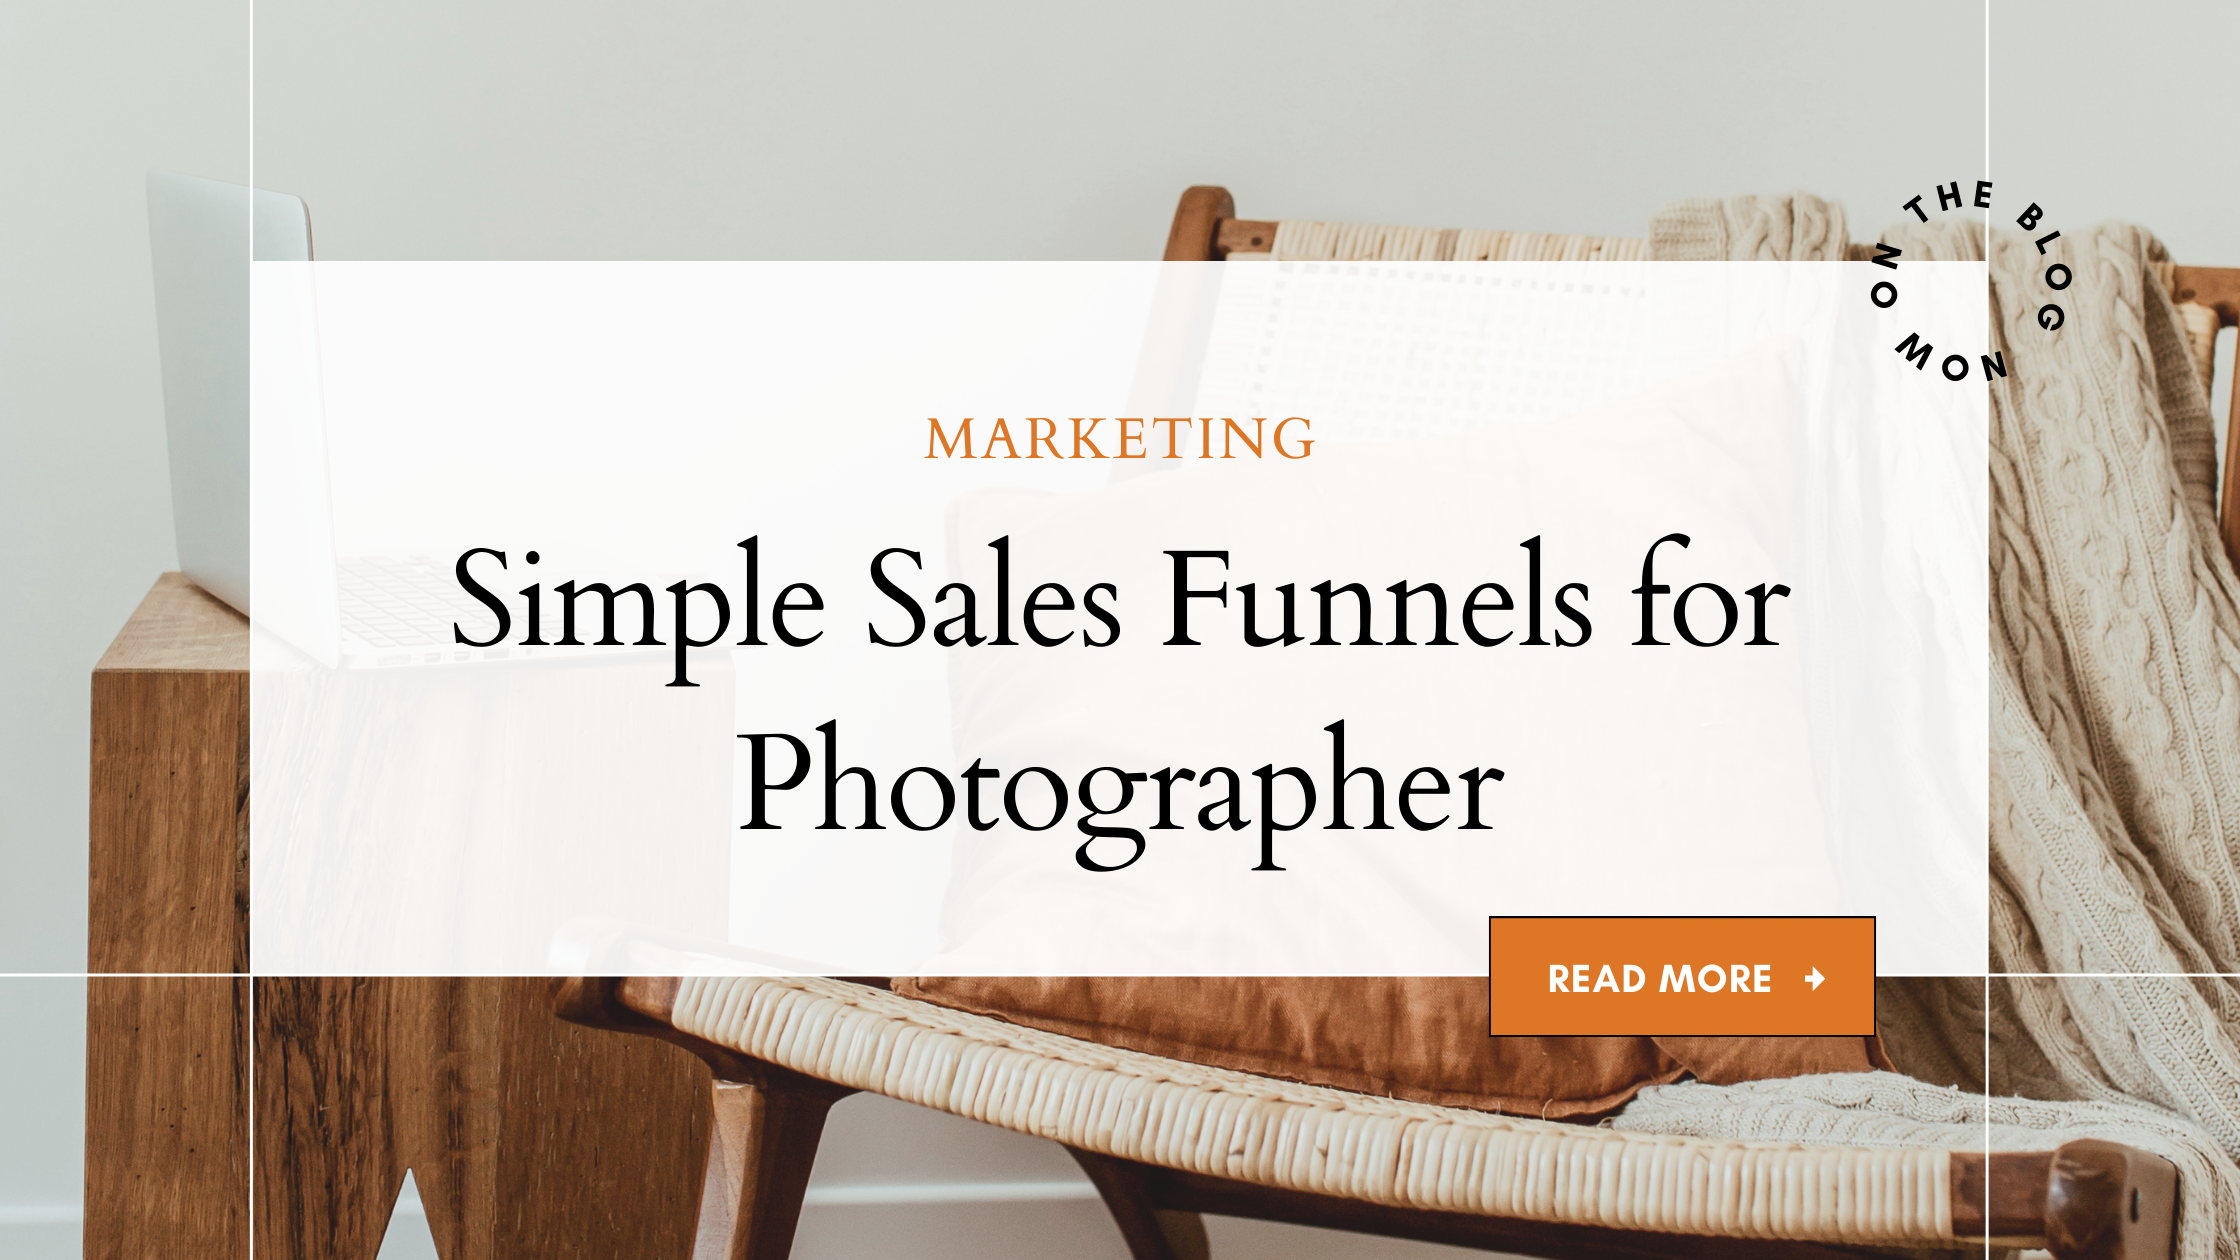 Simple Sales Funnels for Photographer